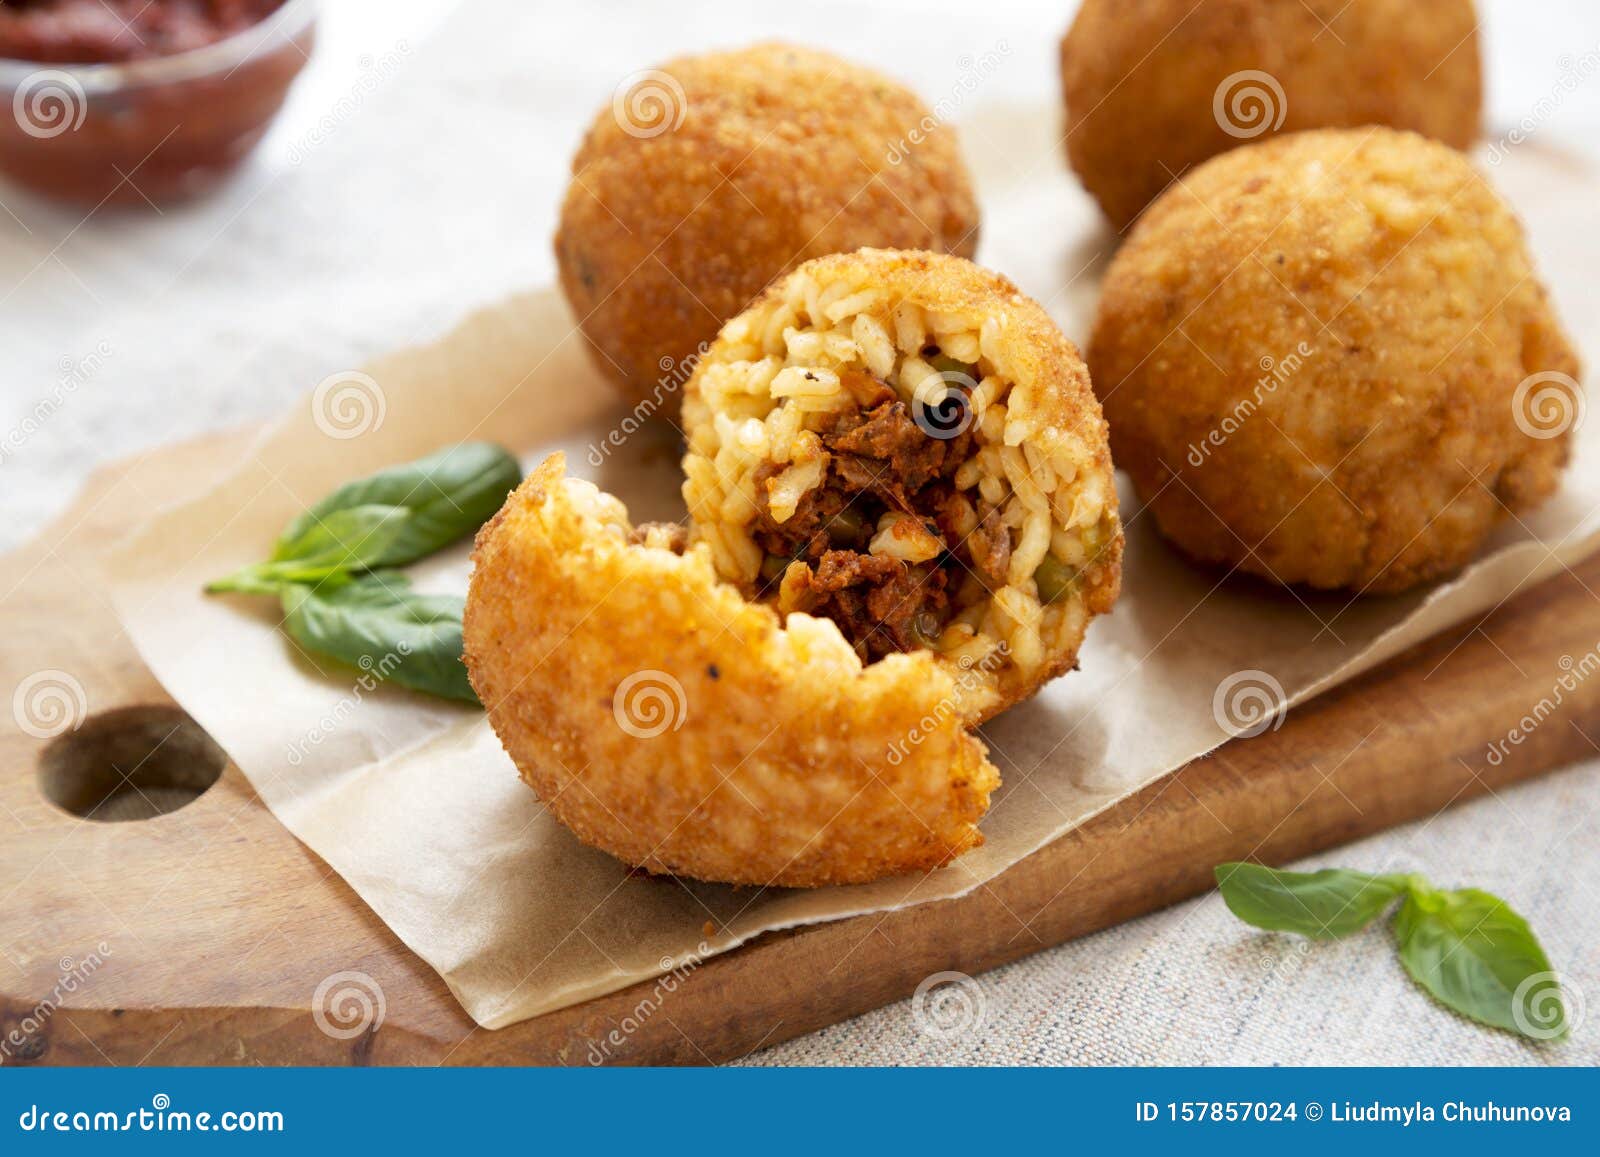 Homemade Fried Arancini With Basil And Marinara On A White Wooden